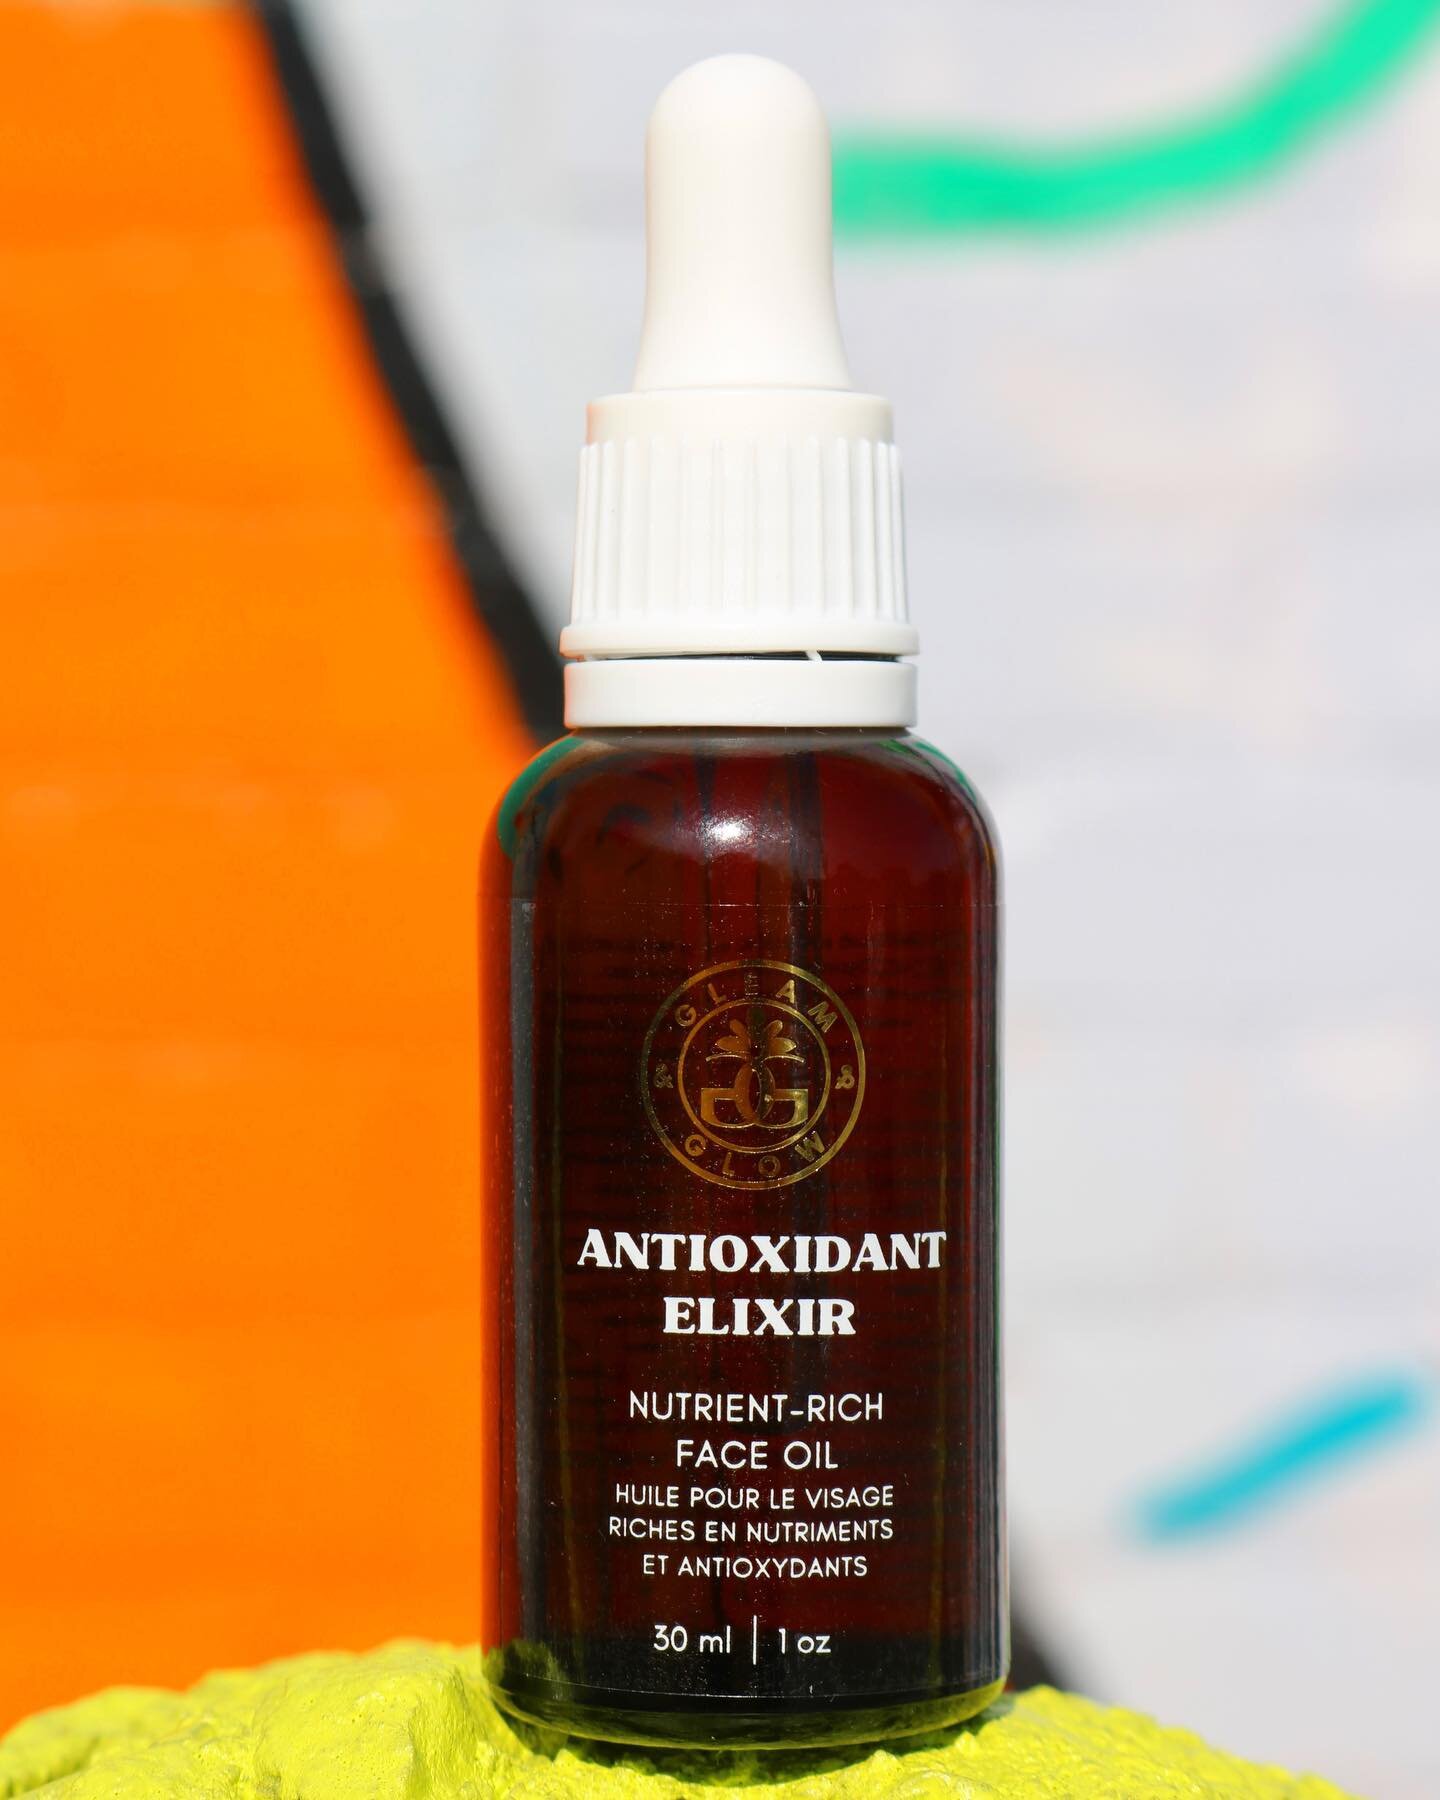 Introducing the antioxidant-rich facial oil ✨

GLEAM &amp; GLOW carefully selected the best nutrient-rich plant oils for optimal skin nourishment and revitalization ⚡️

Featuring prickly pear, rosehip, evening primrose and sea buckthorn oil 🌹

T